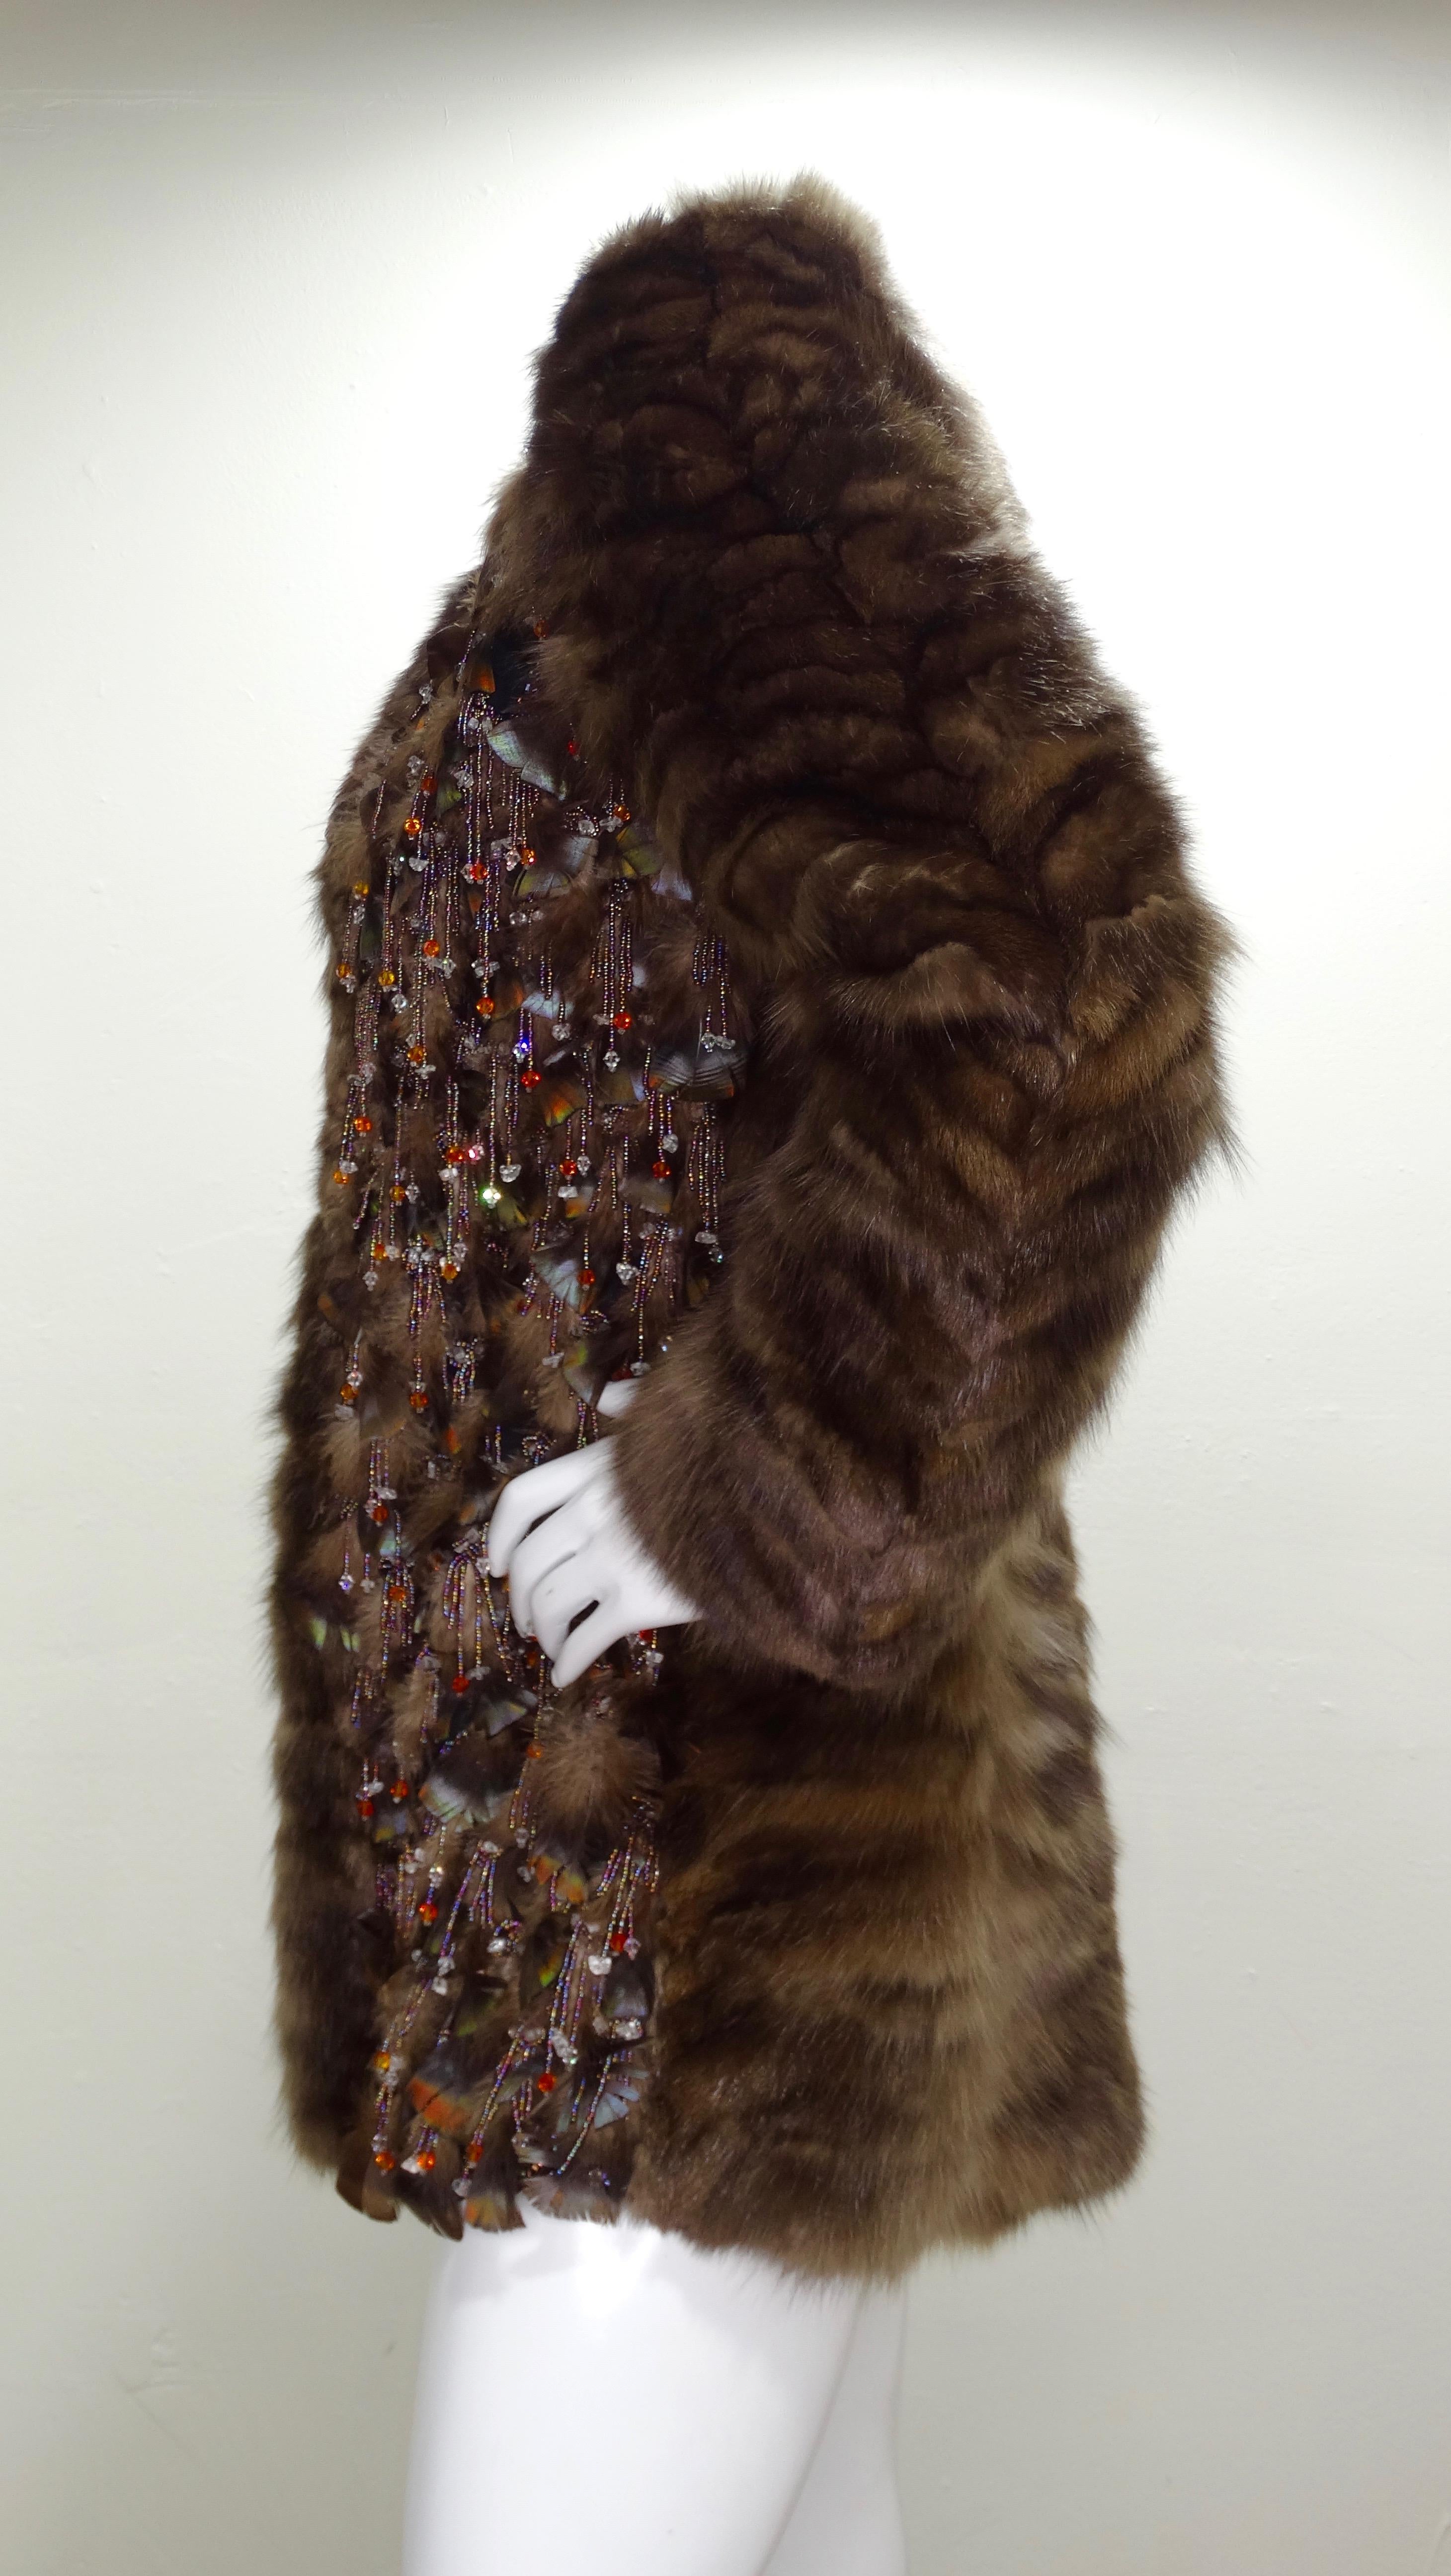 Stay cozy while looking amazing in this Oscar de la Renta fur coat! Circa recent 2000s, this coat is crafted from ultra soft Sable fur and is adorned with feathers and multi-colored beaded fringe. Interior is lined with olive tone Silk. Unique and